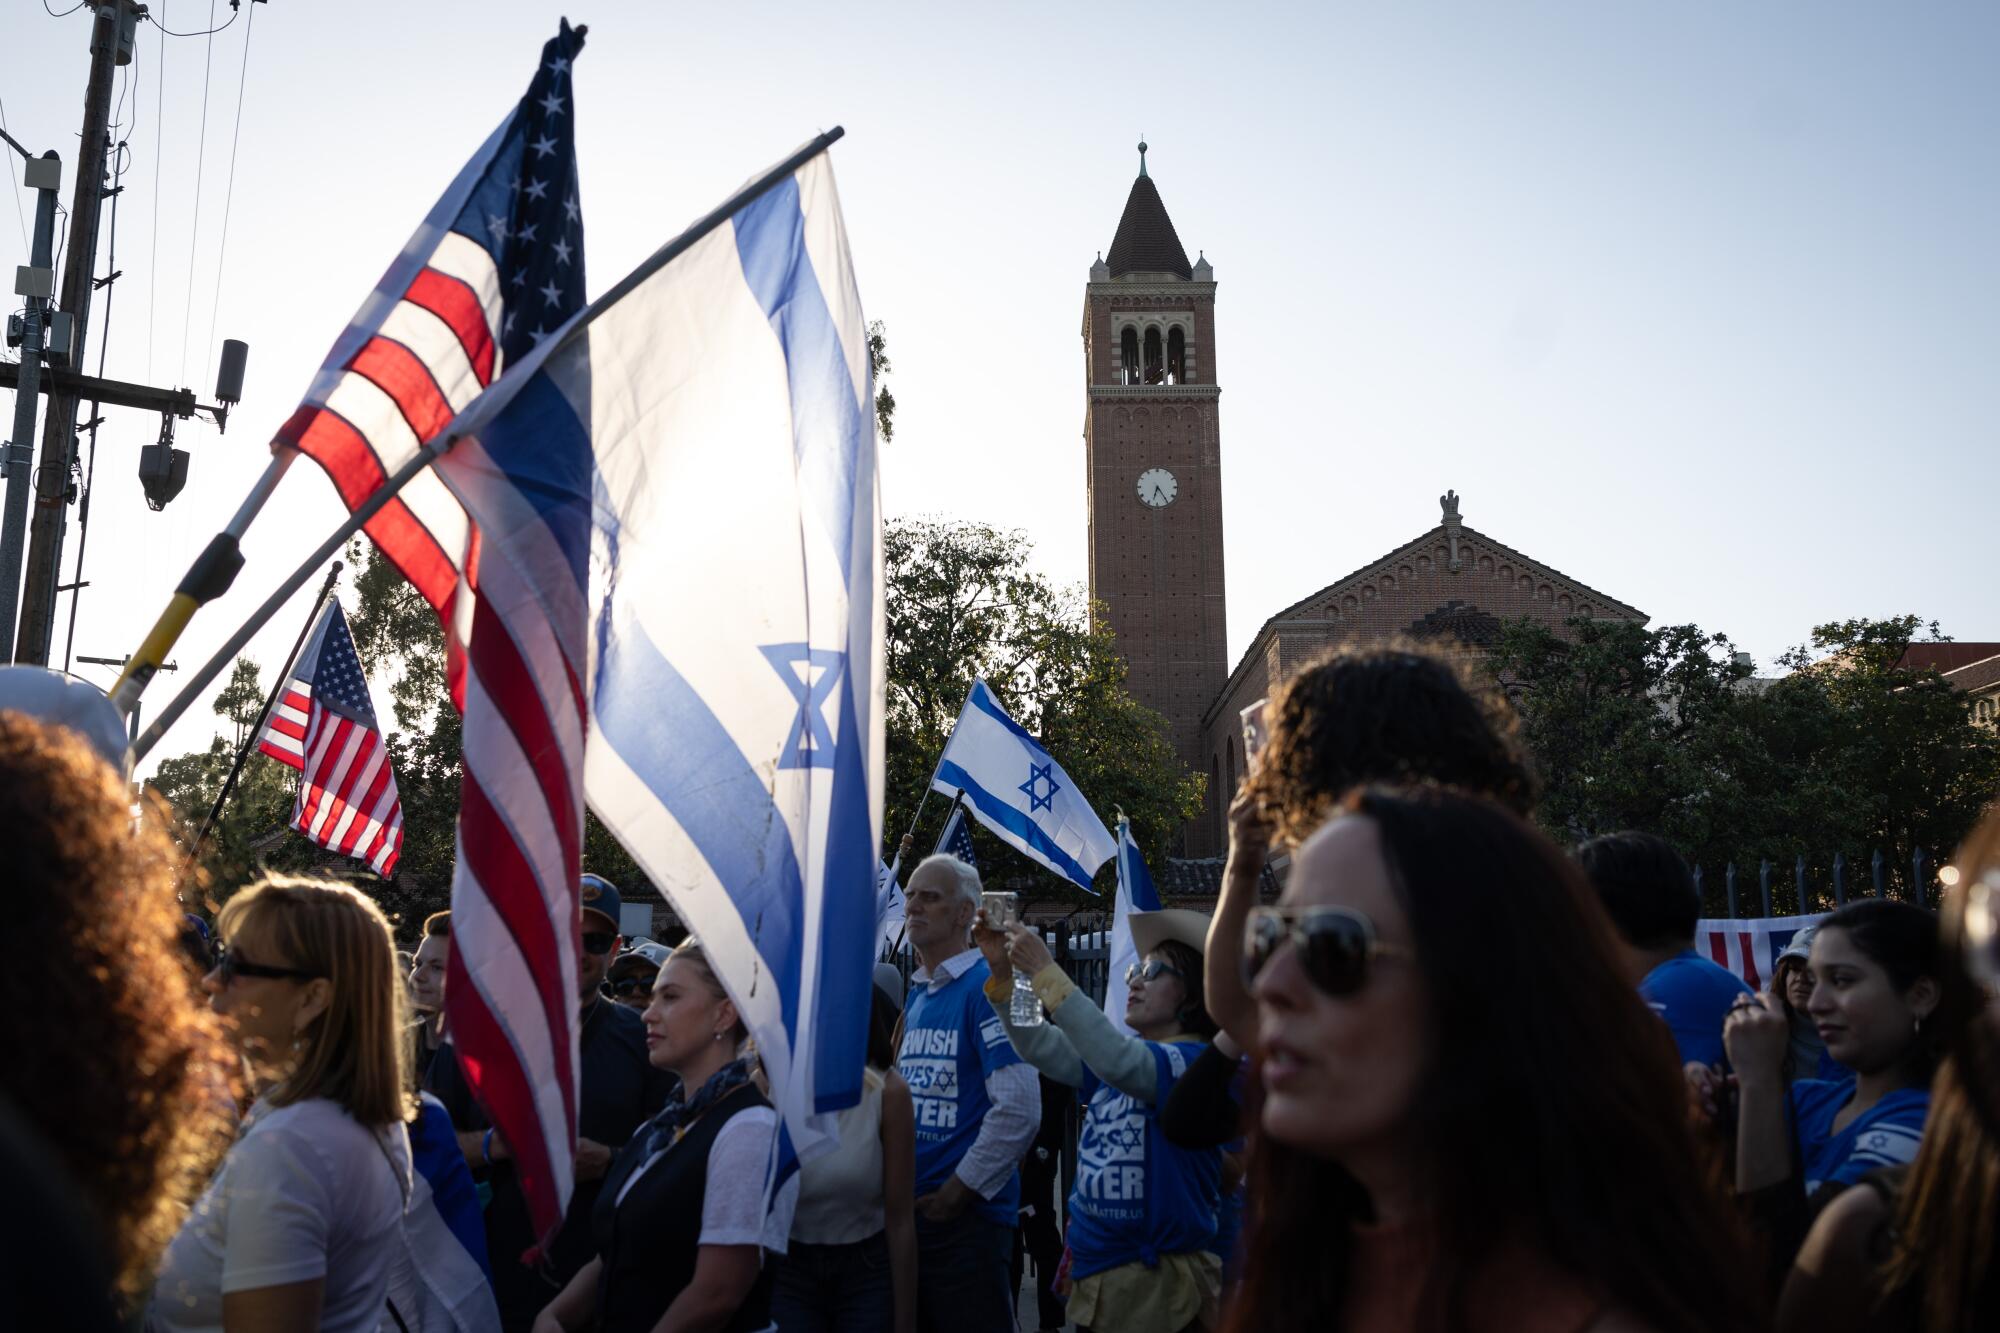     Pro-Israel supporters gather at the "United for Israel" demonstration at the University of the South 